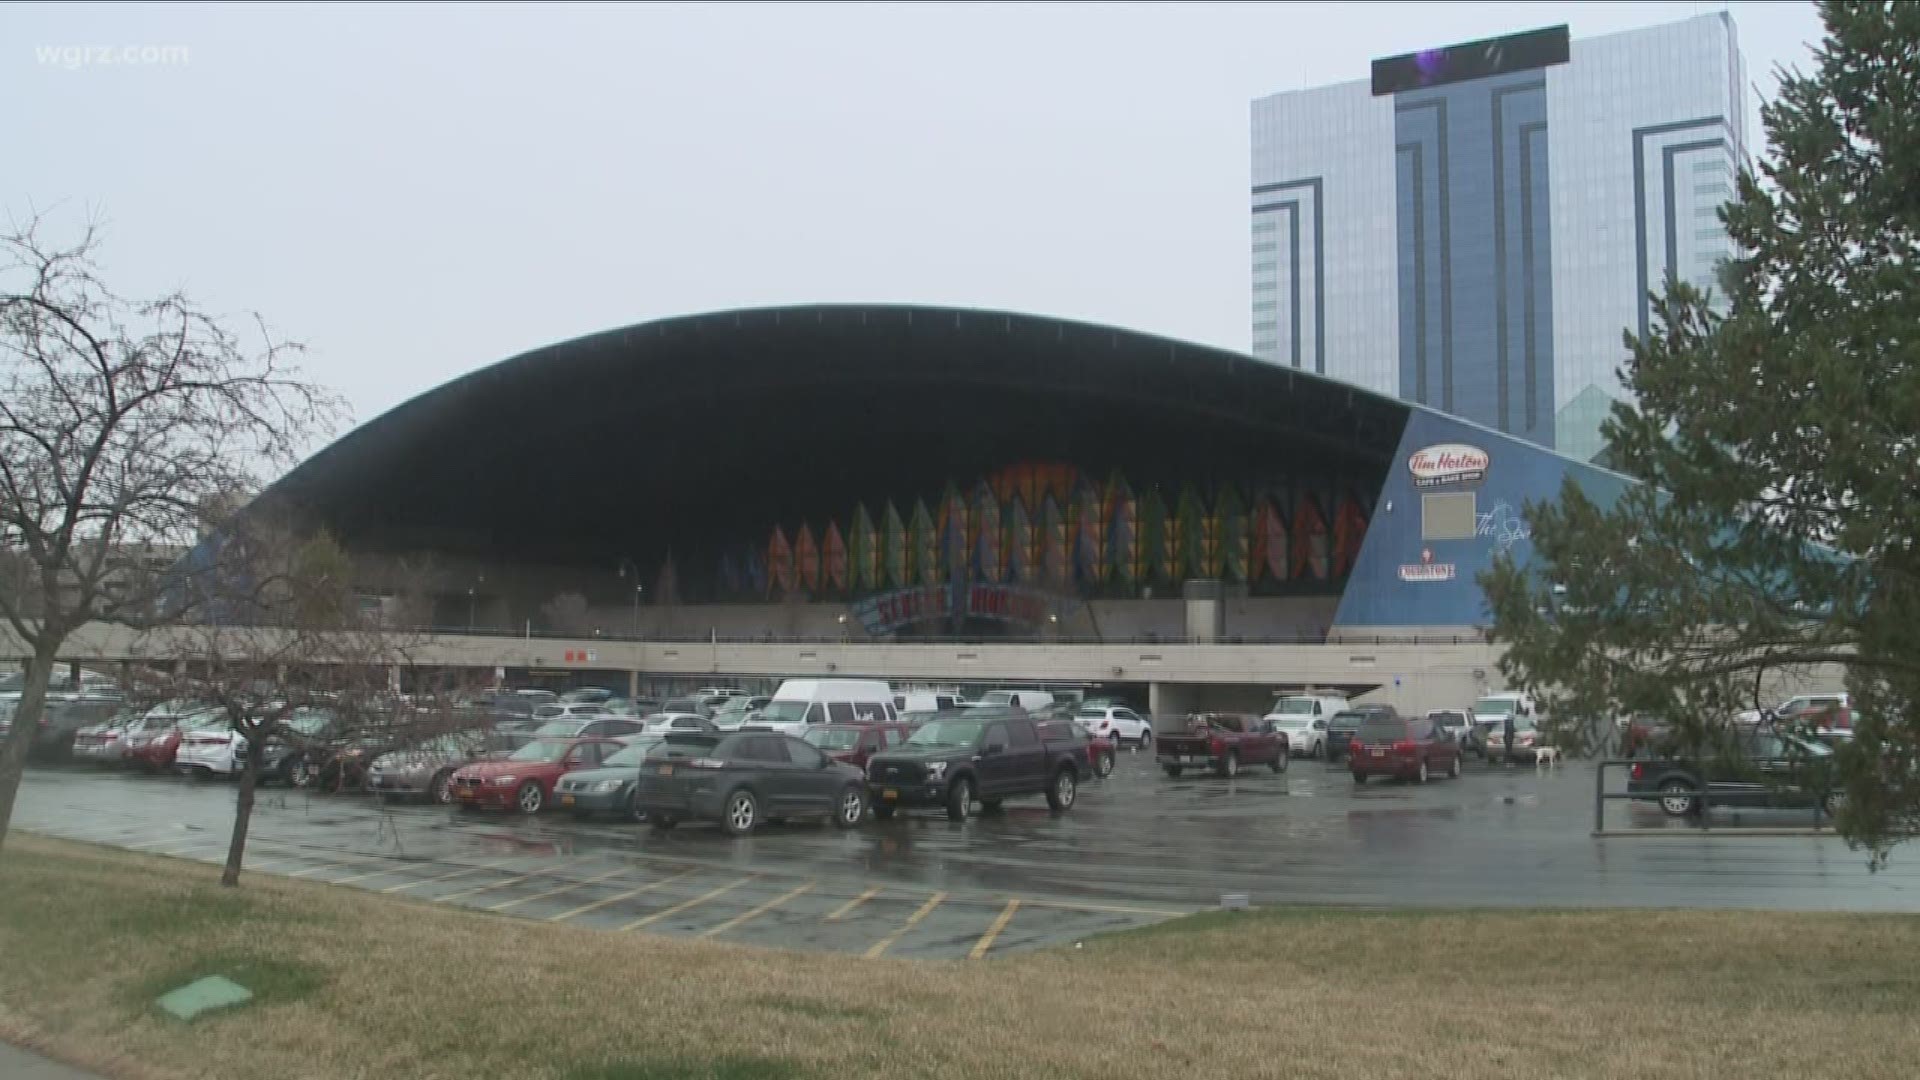 Senecas want a federal review on casino payment